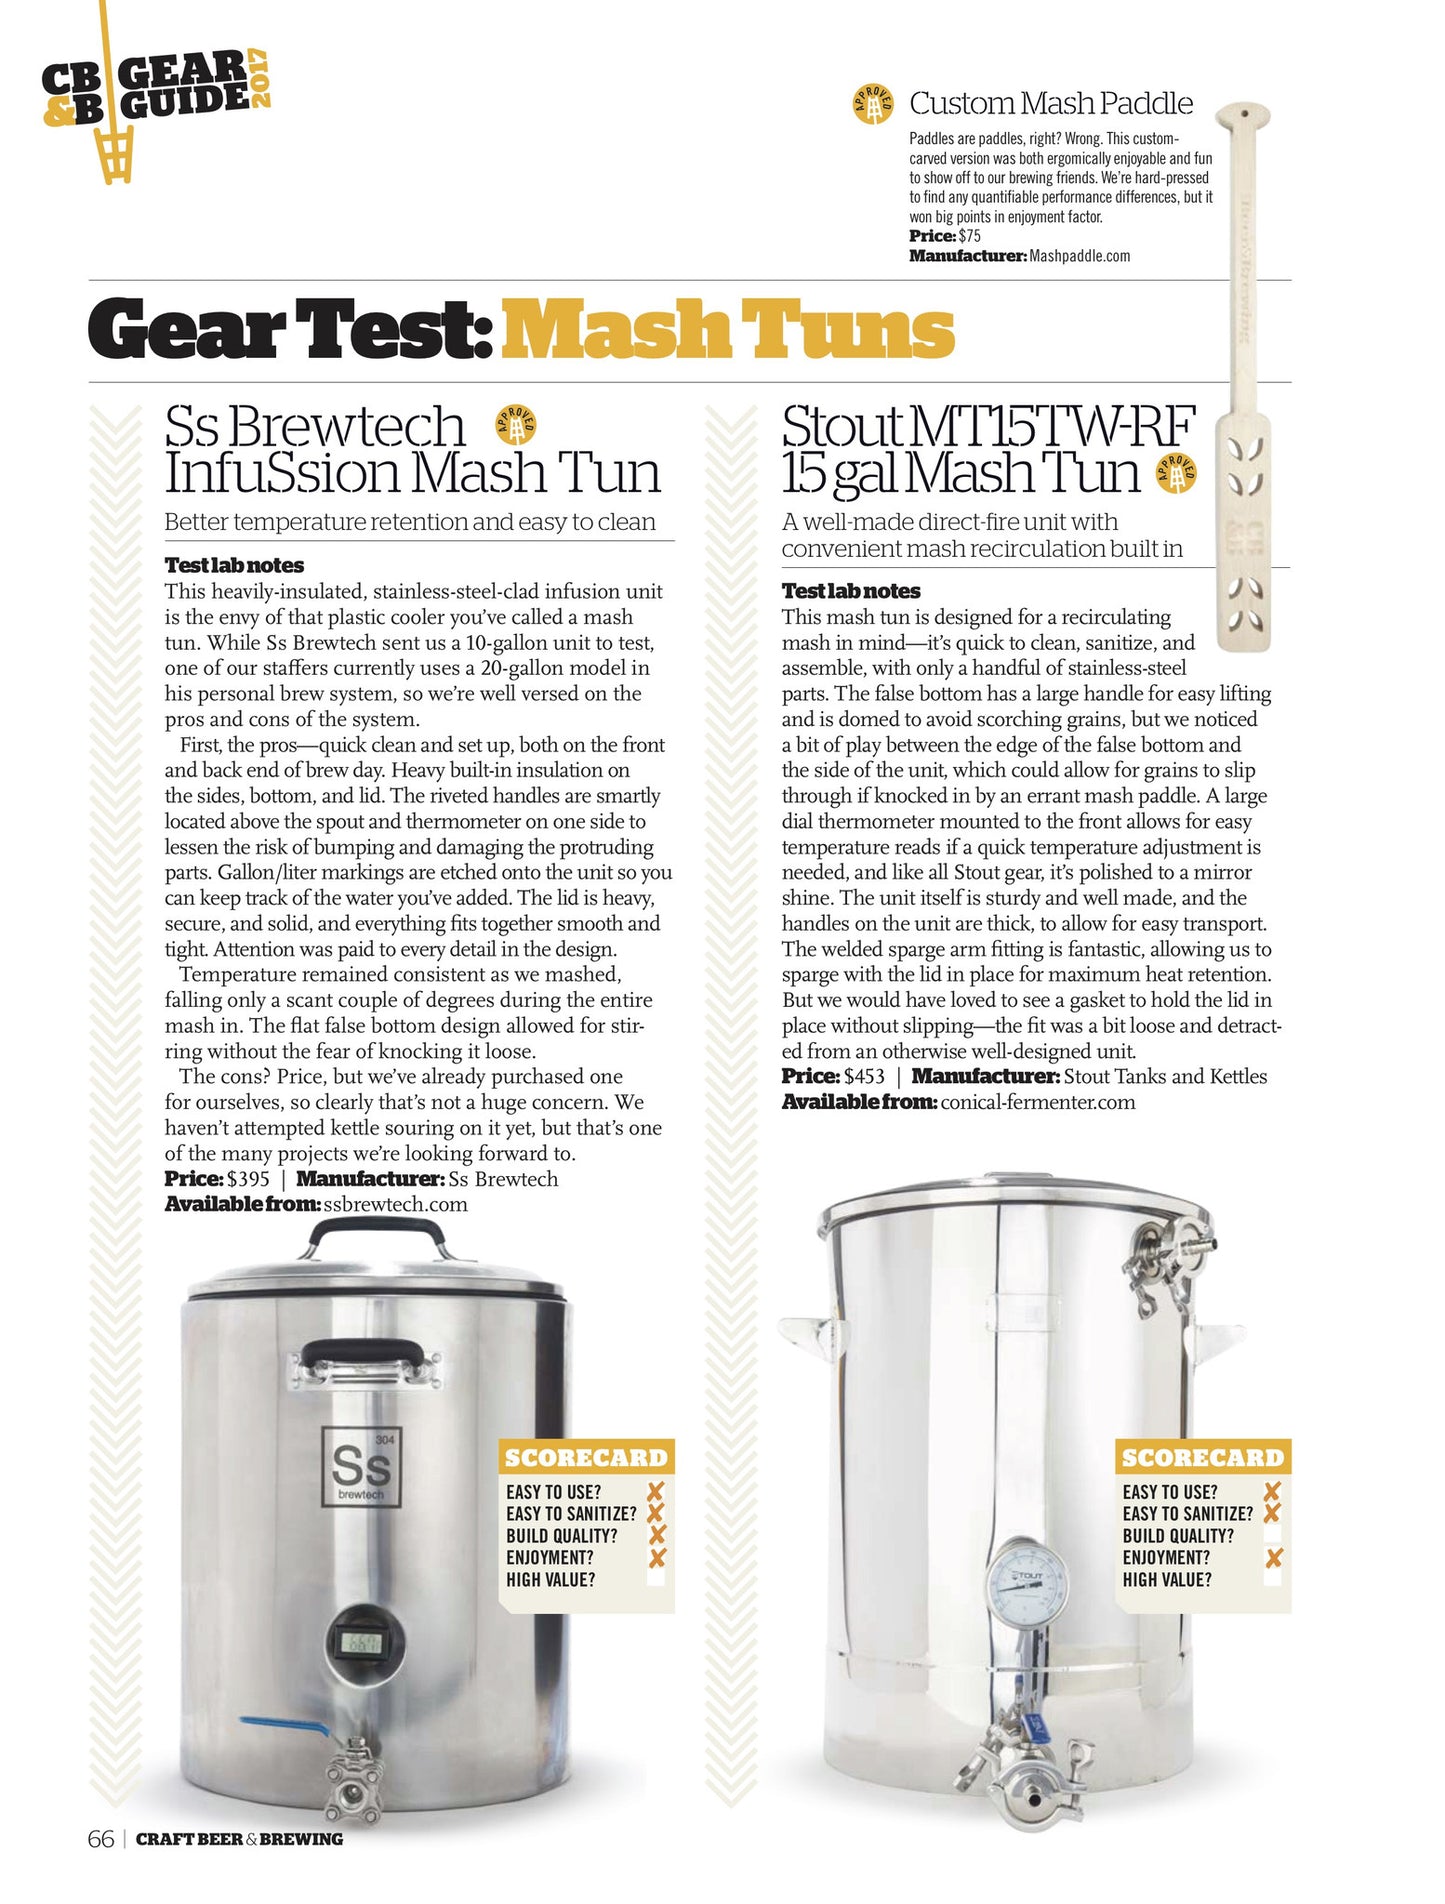 April-May 2017 Issue (The Gear Guide) - Craft Beer & Brewing